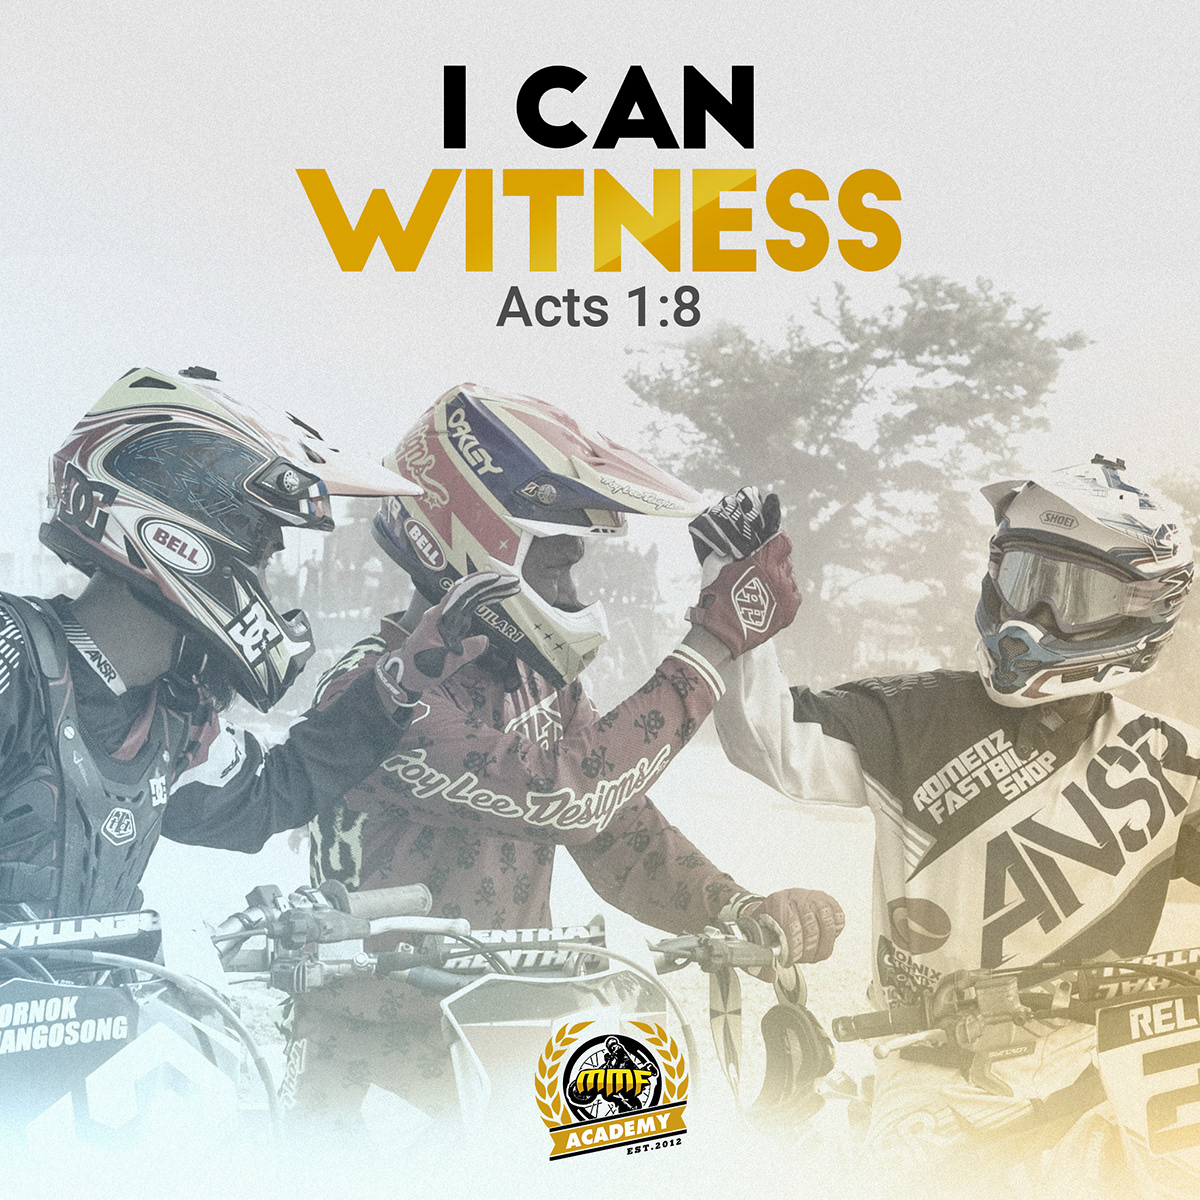 Motocross bible verse graphic design  typography   Photography 